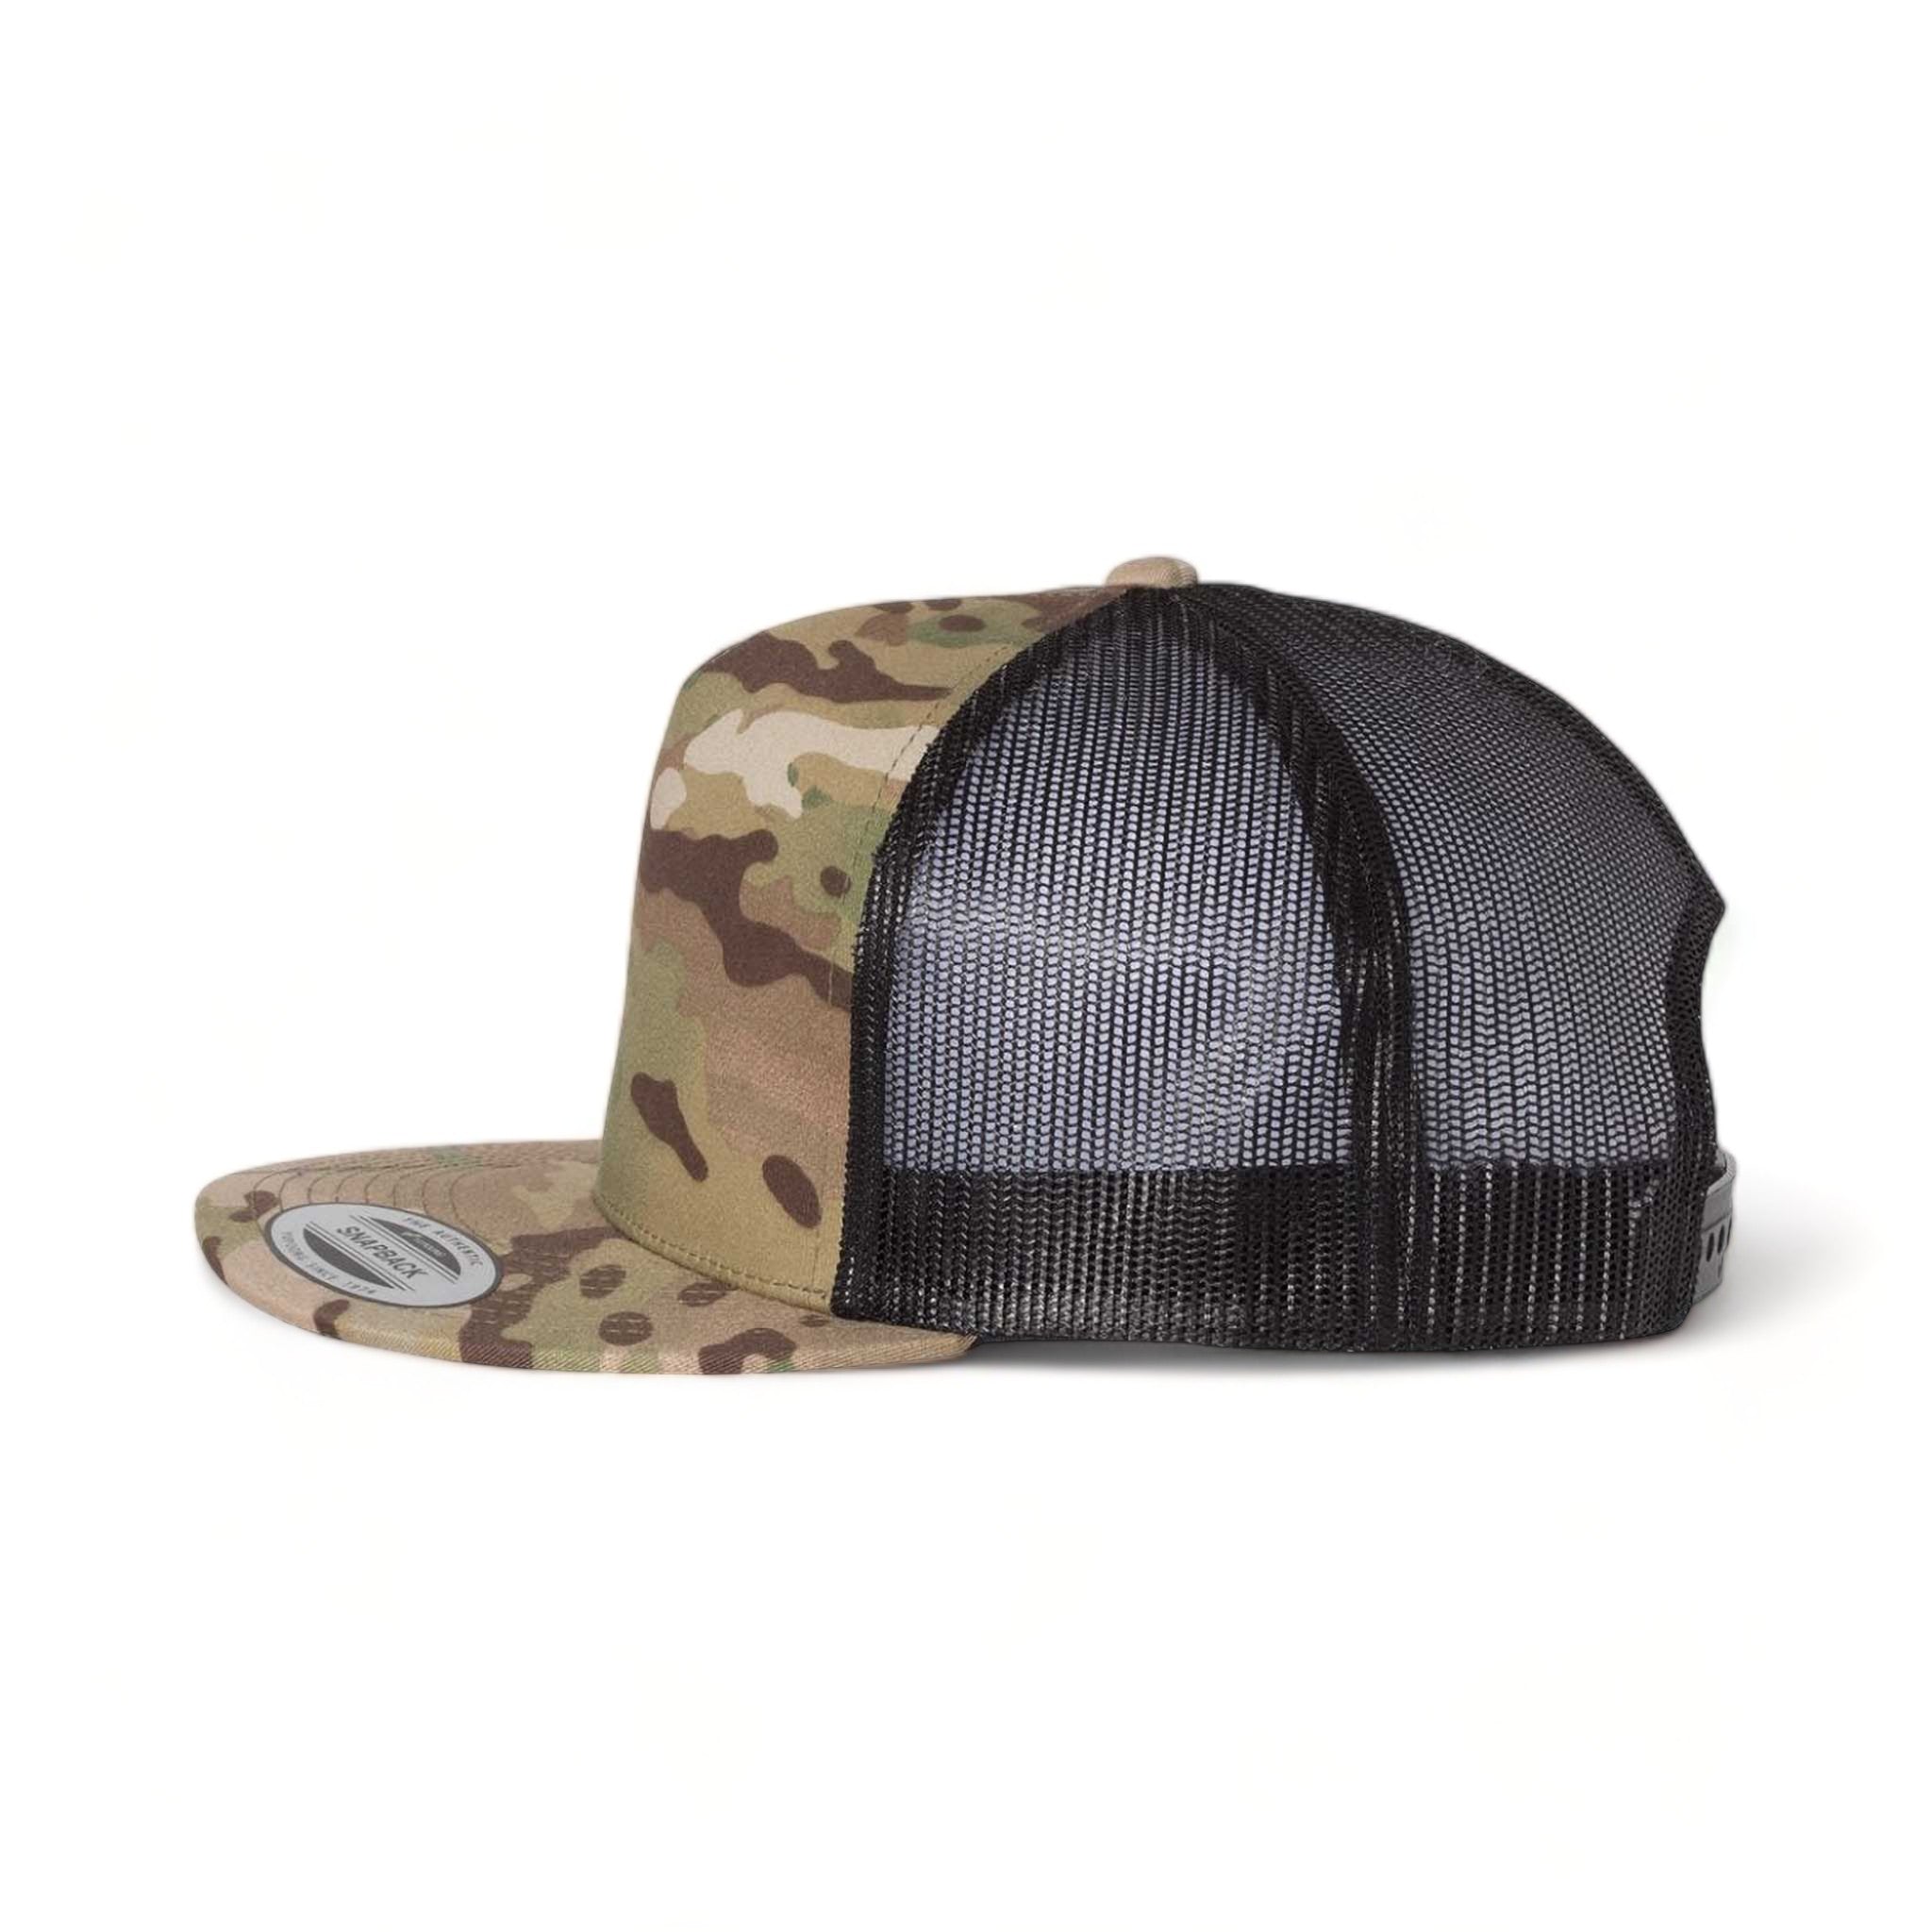 Side view of YP Classics 6006 custom hat in multicam green and black